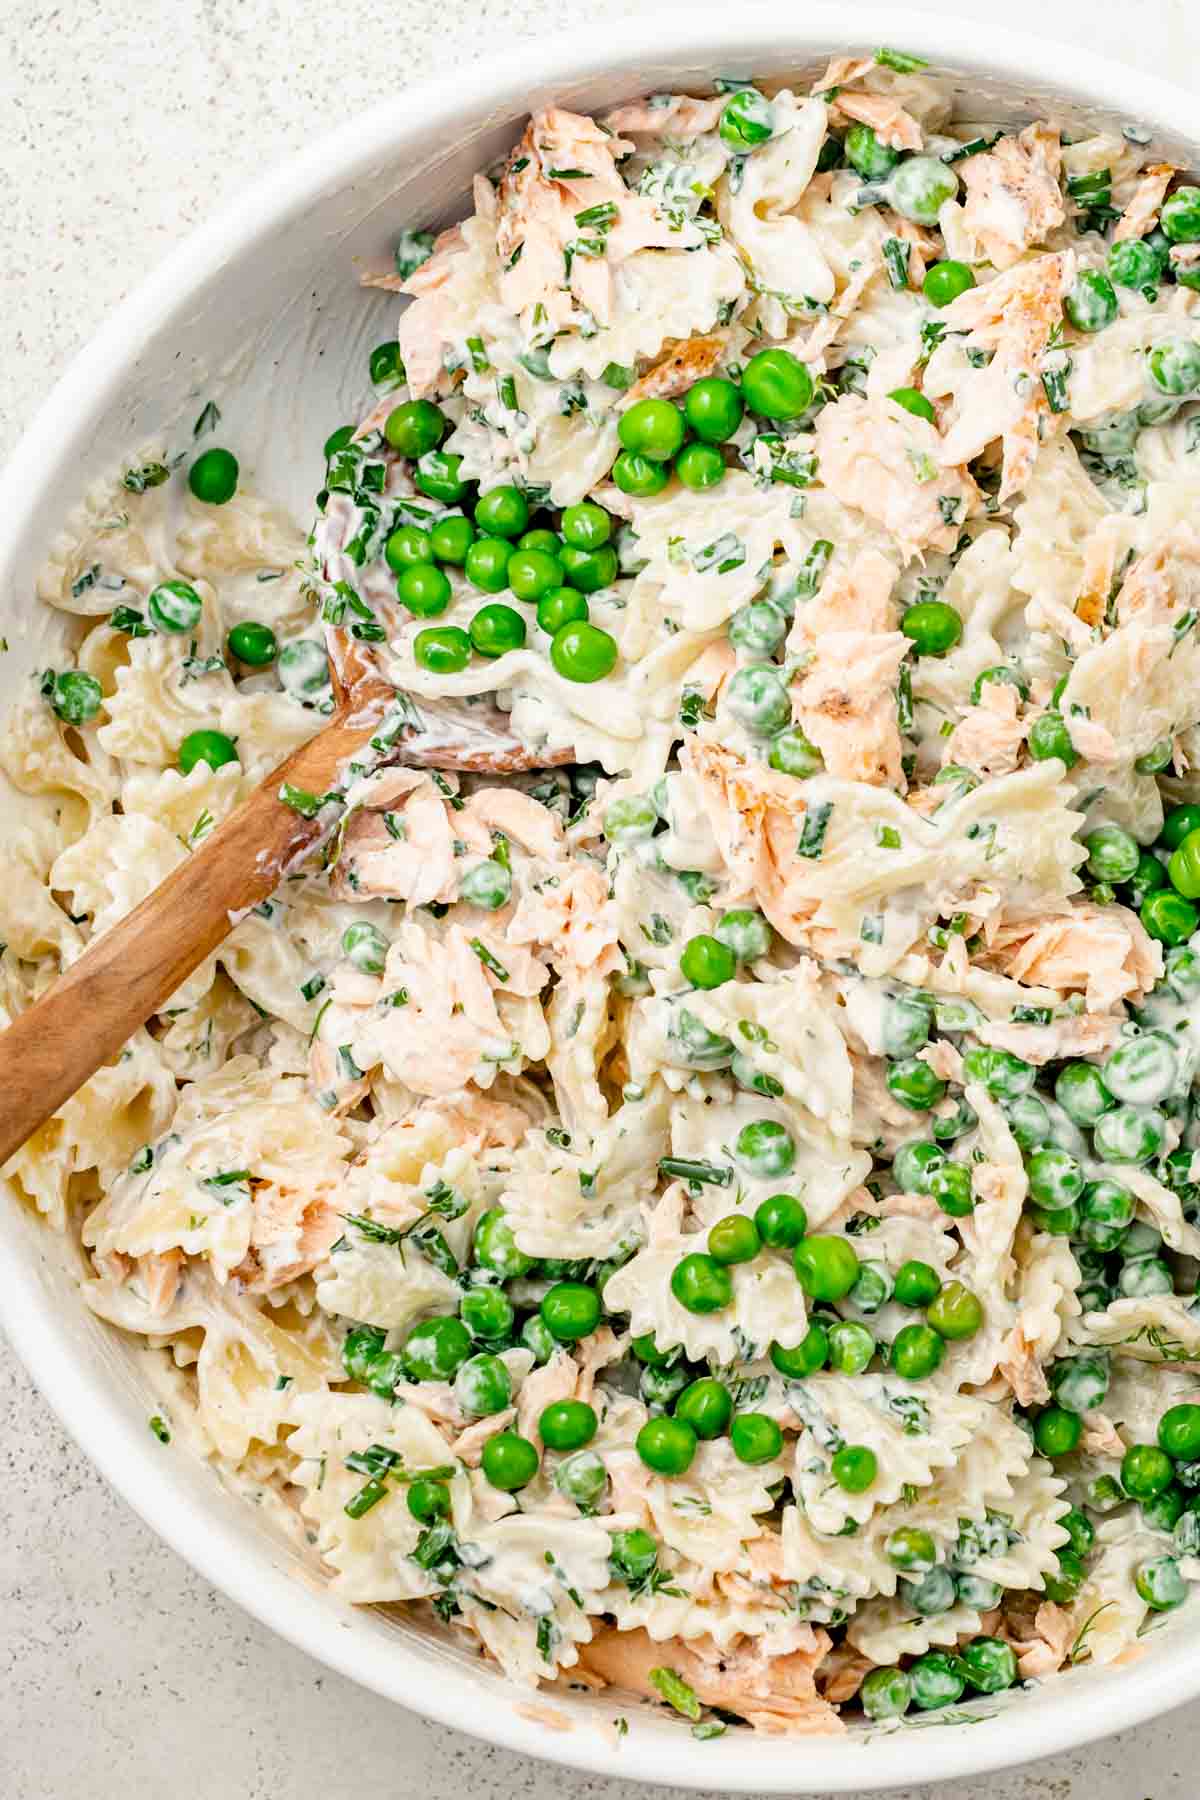 salmon pasta salad with peas and farfalle pasta in a white bowl with a wooden spoon sticking out